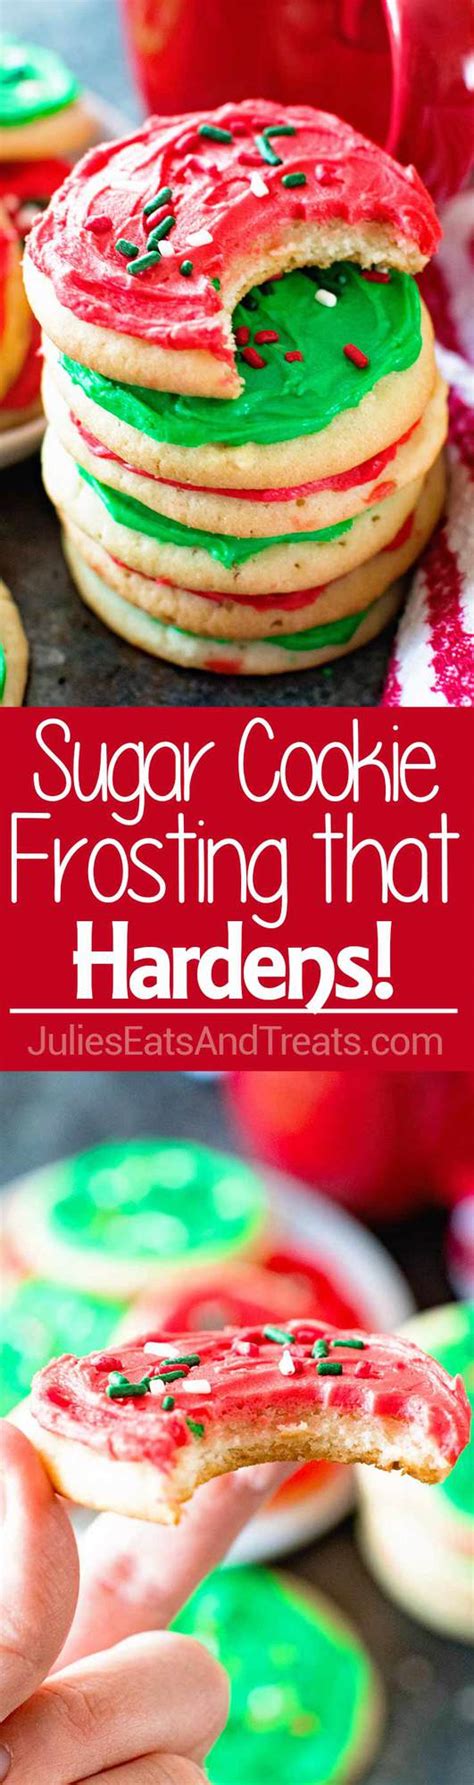 This sugar cookie icing hardens smooth, firm and glossy. Homemade Sugar Cookie Frosting that Hardens! - Julie's ...